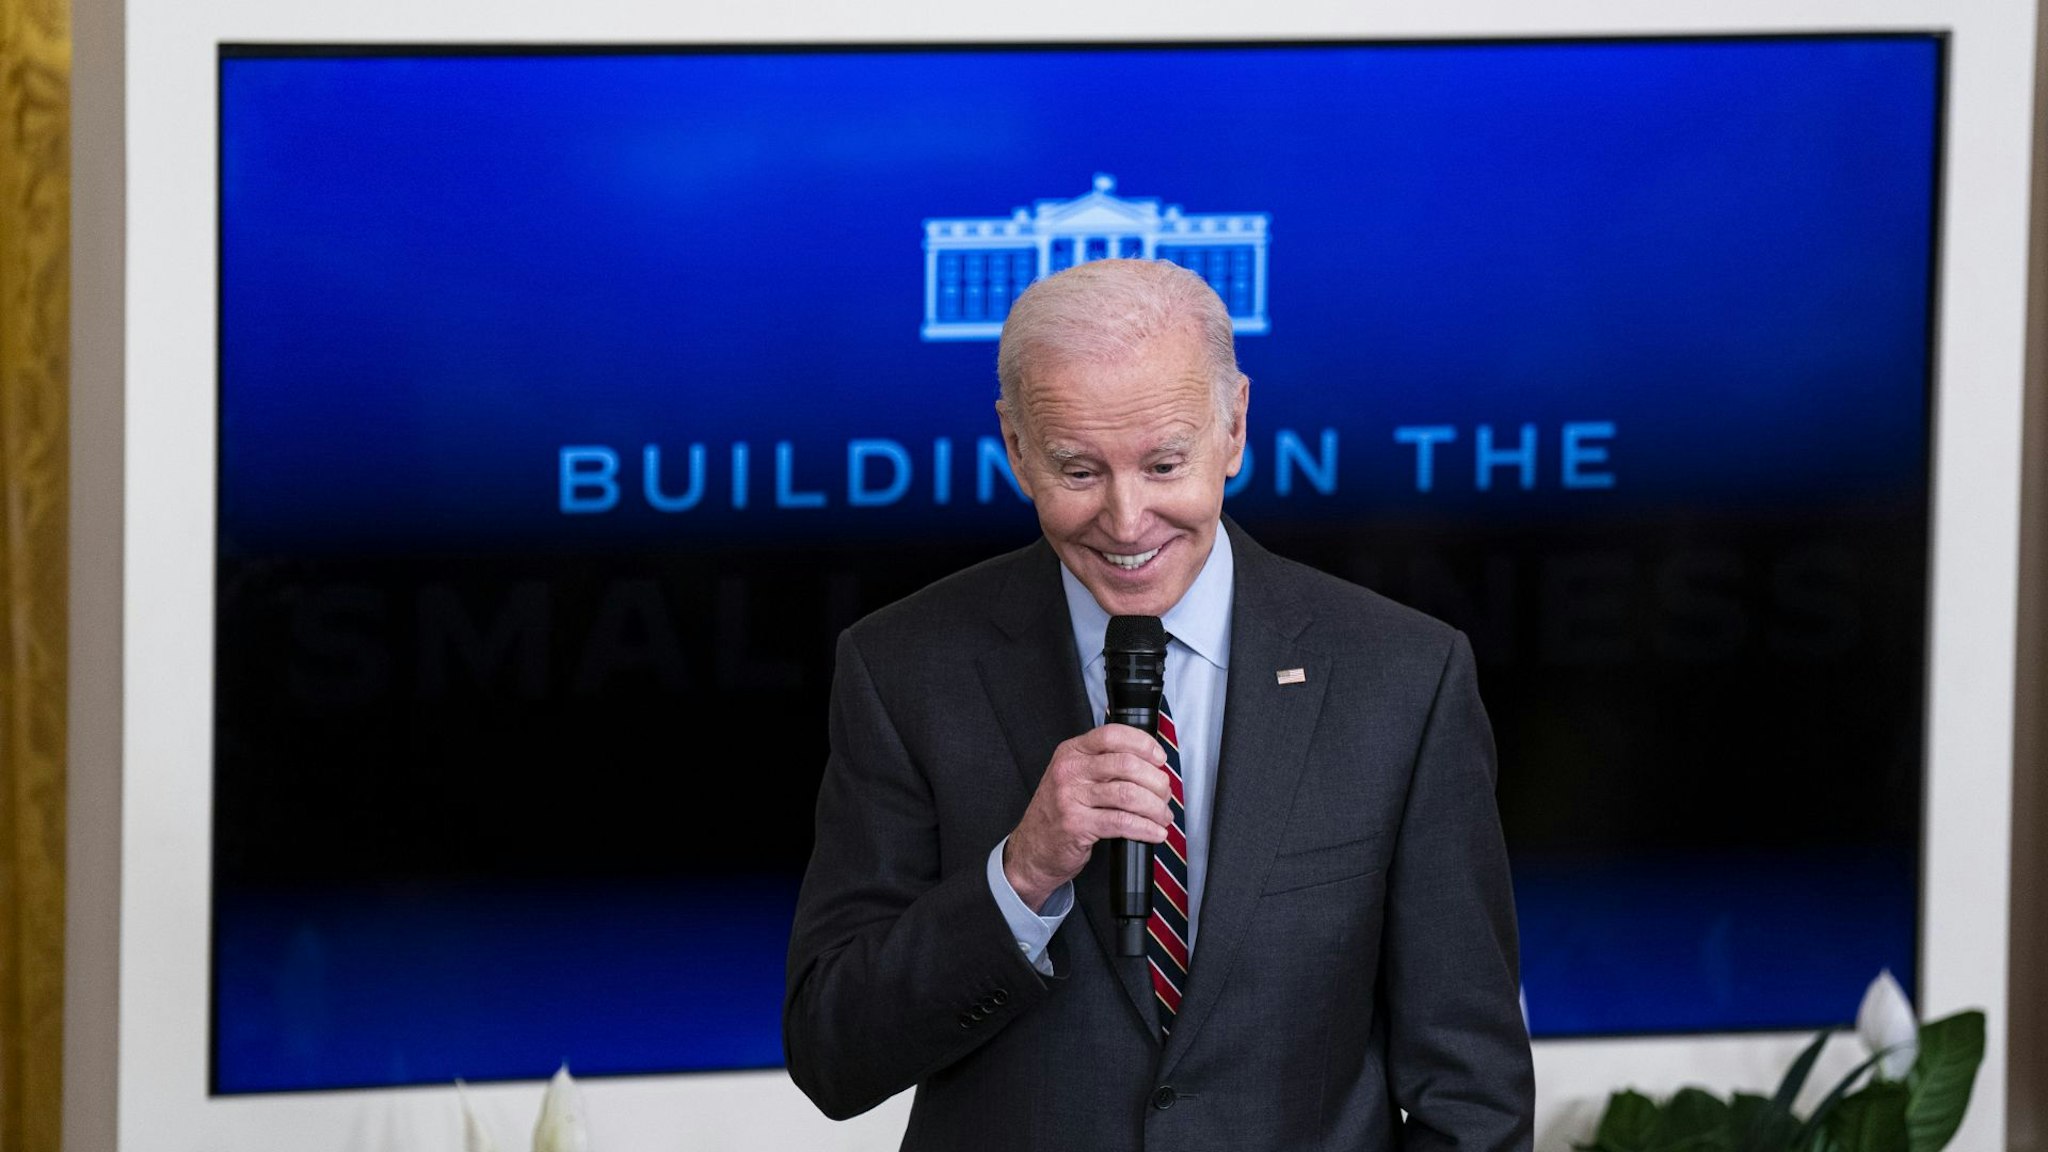 US President Joe Biden speaks during the US Small Business Administration (SBA) Women's Business Summit in the East Room of the White House on Monday, March 27, 2023. Biden at the event again called on Congress to ban assault weapons and take other steps to address gun violence following another deadly school shooting, this time in Nashville, Tennessee.